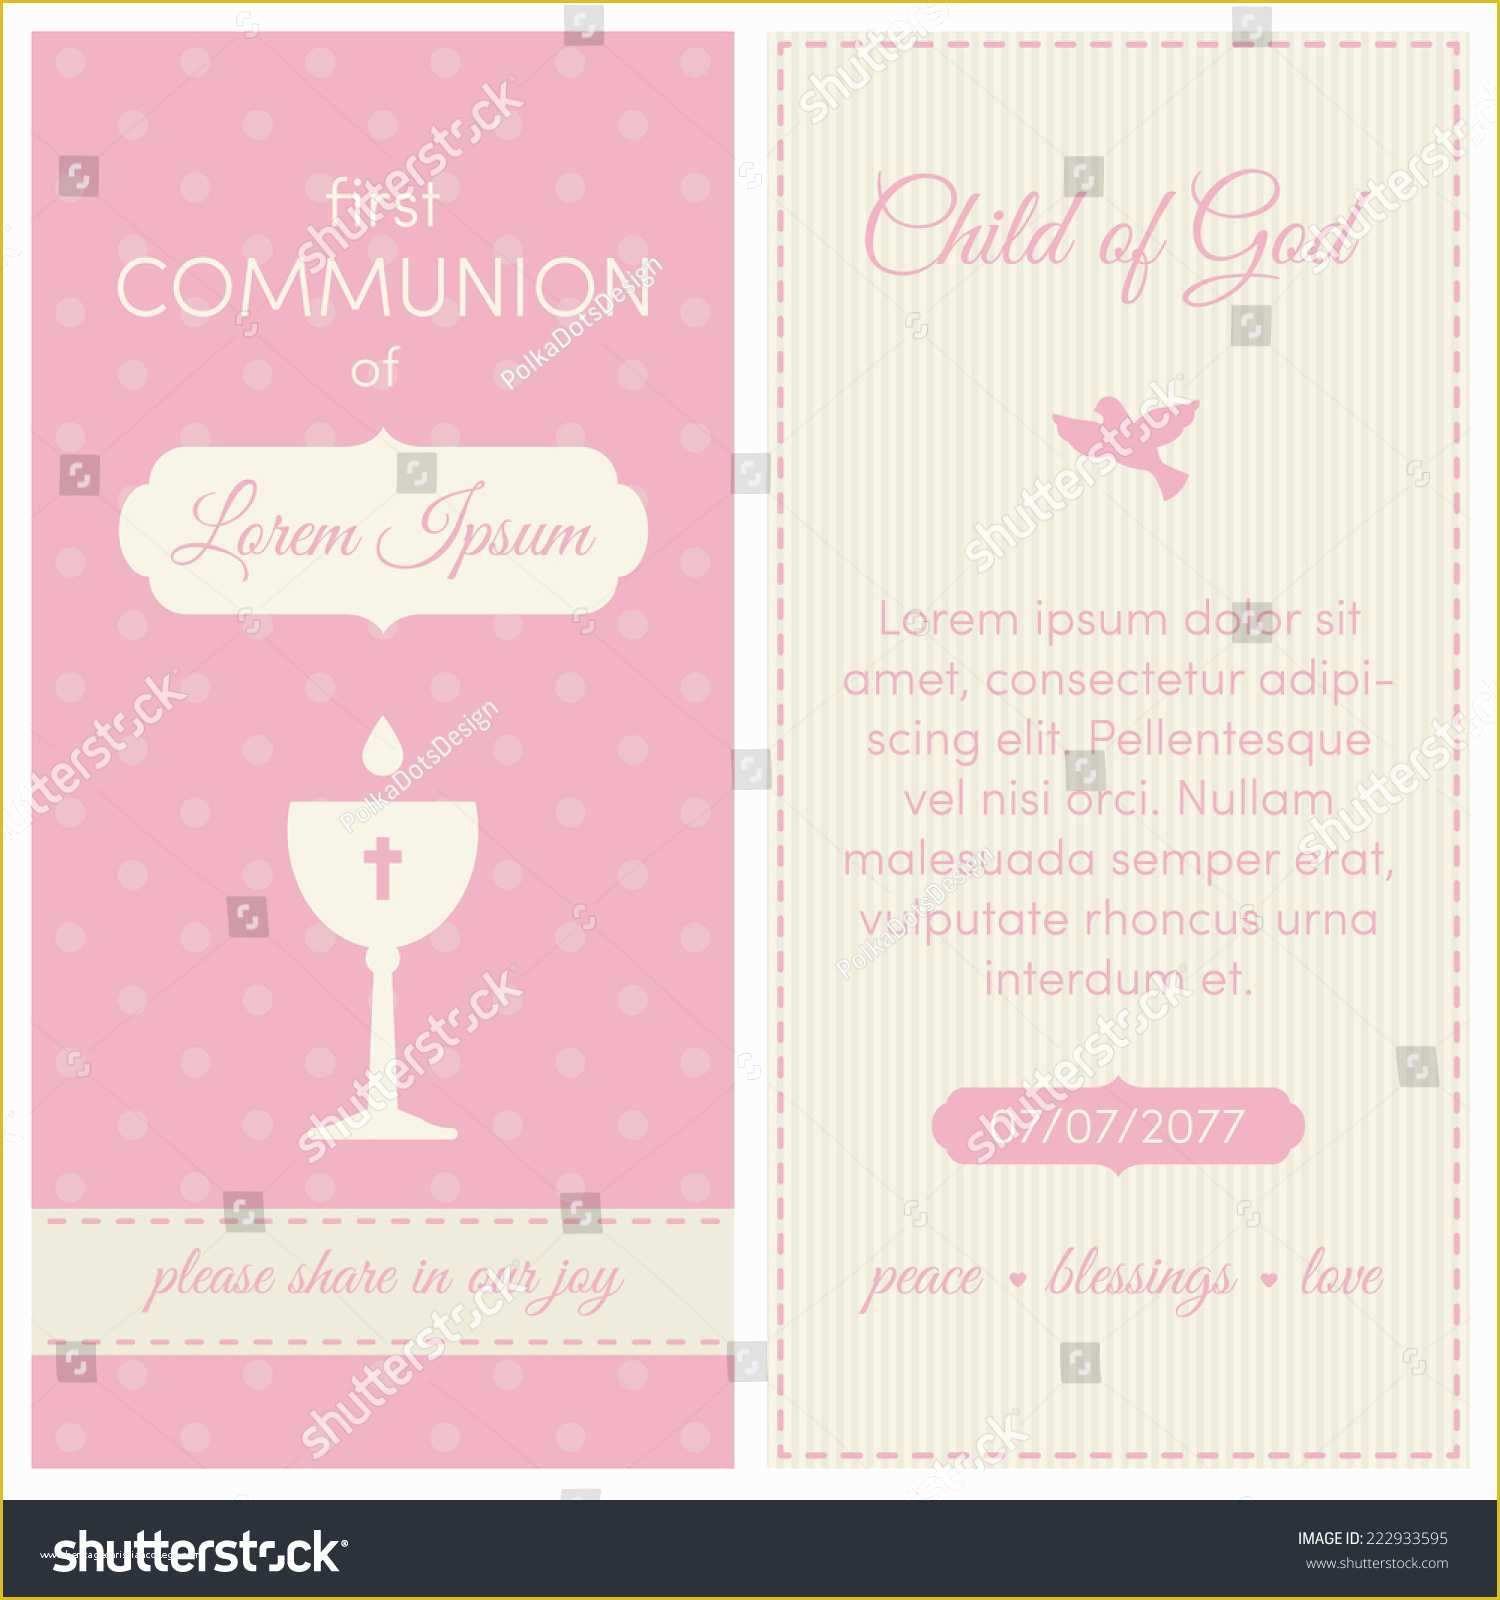 First Communion Card Templates Free Of First Munion Invitation Templates Invitation theme Design